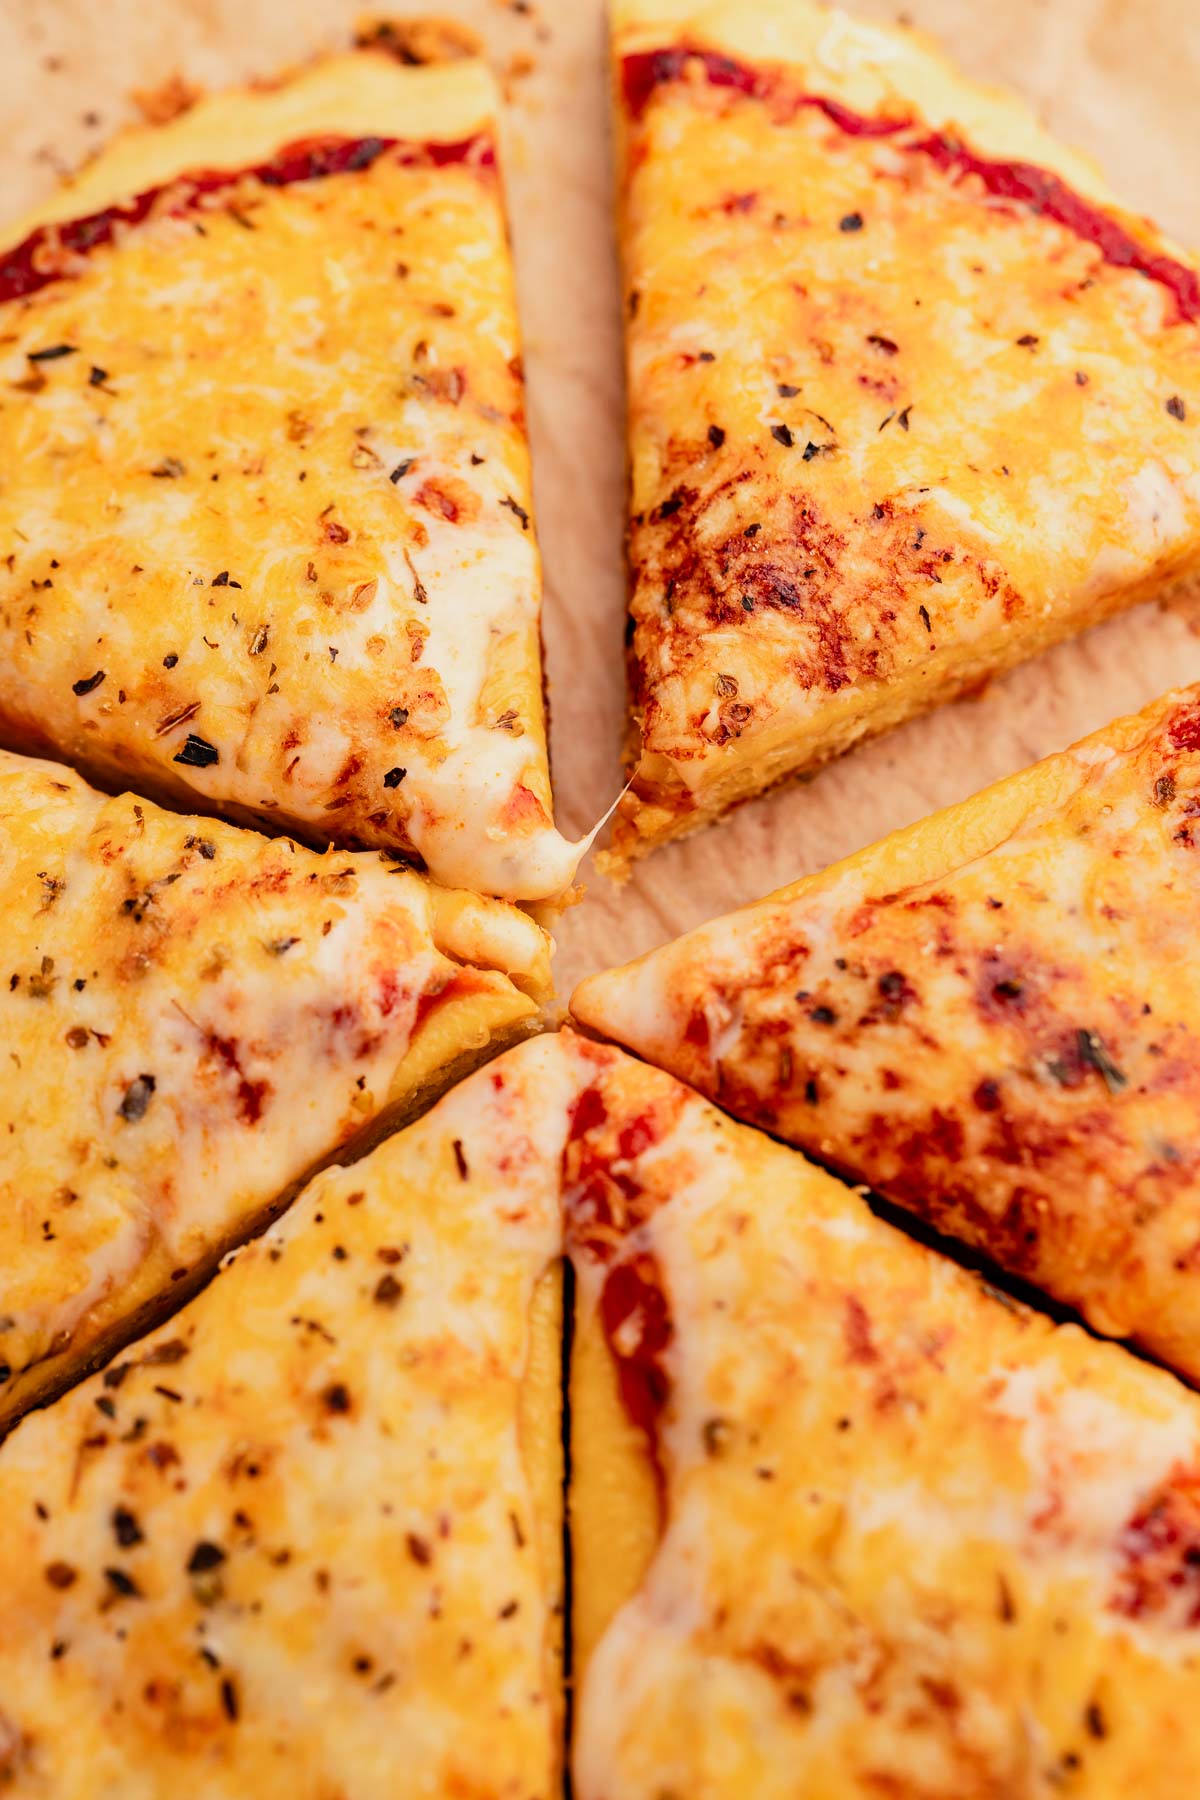 Slices of cheese pizza with a chickpea flour crust, featuring a visible melted cheese pull on a wooden surface.